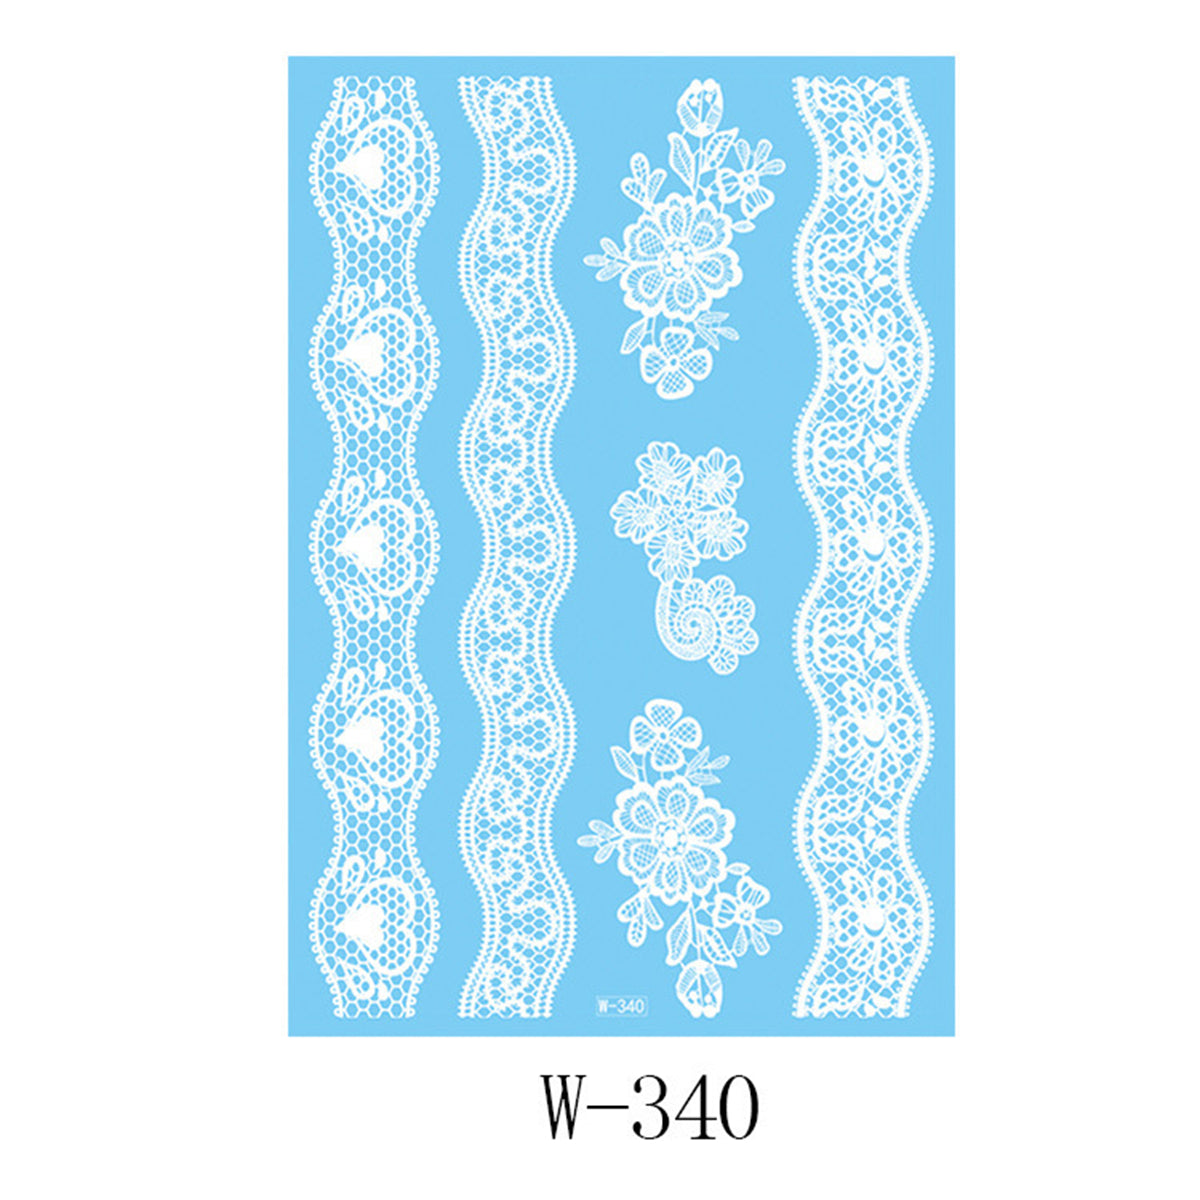 White Heart Floral Temporary Tattoos-Set Of 5